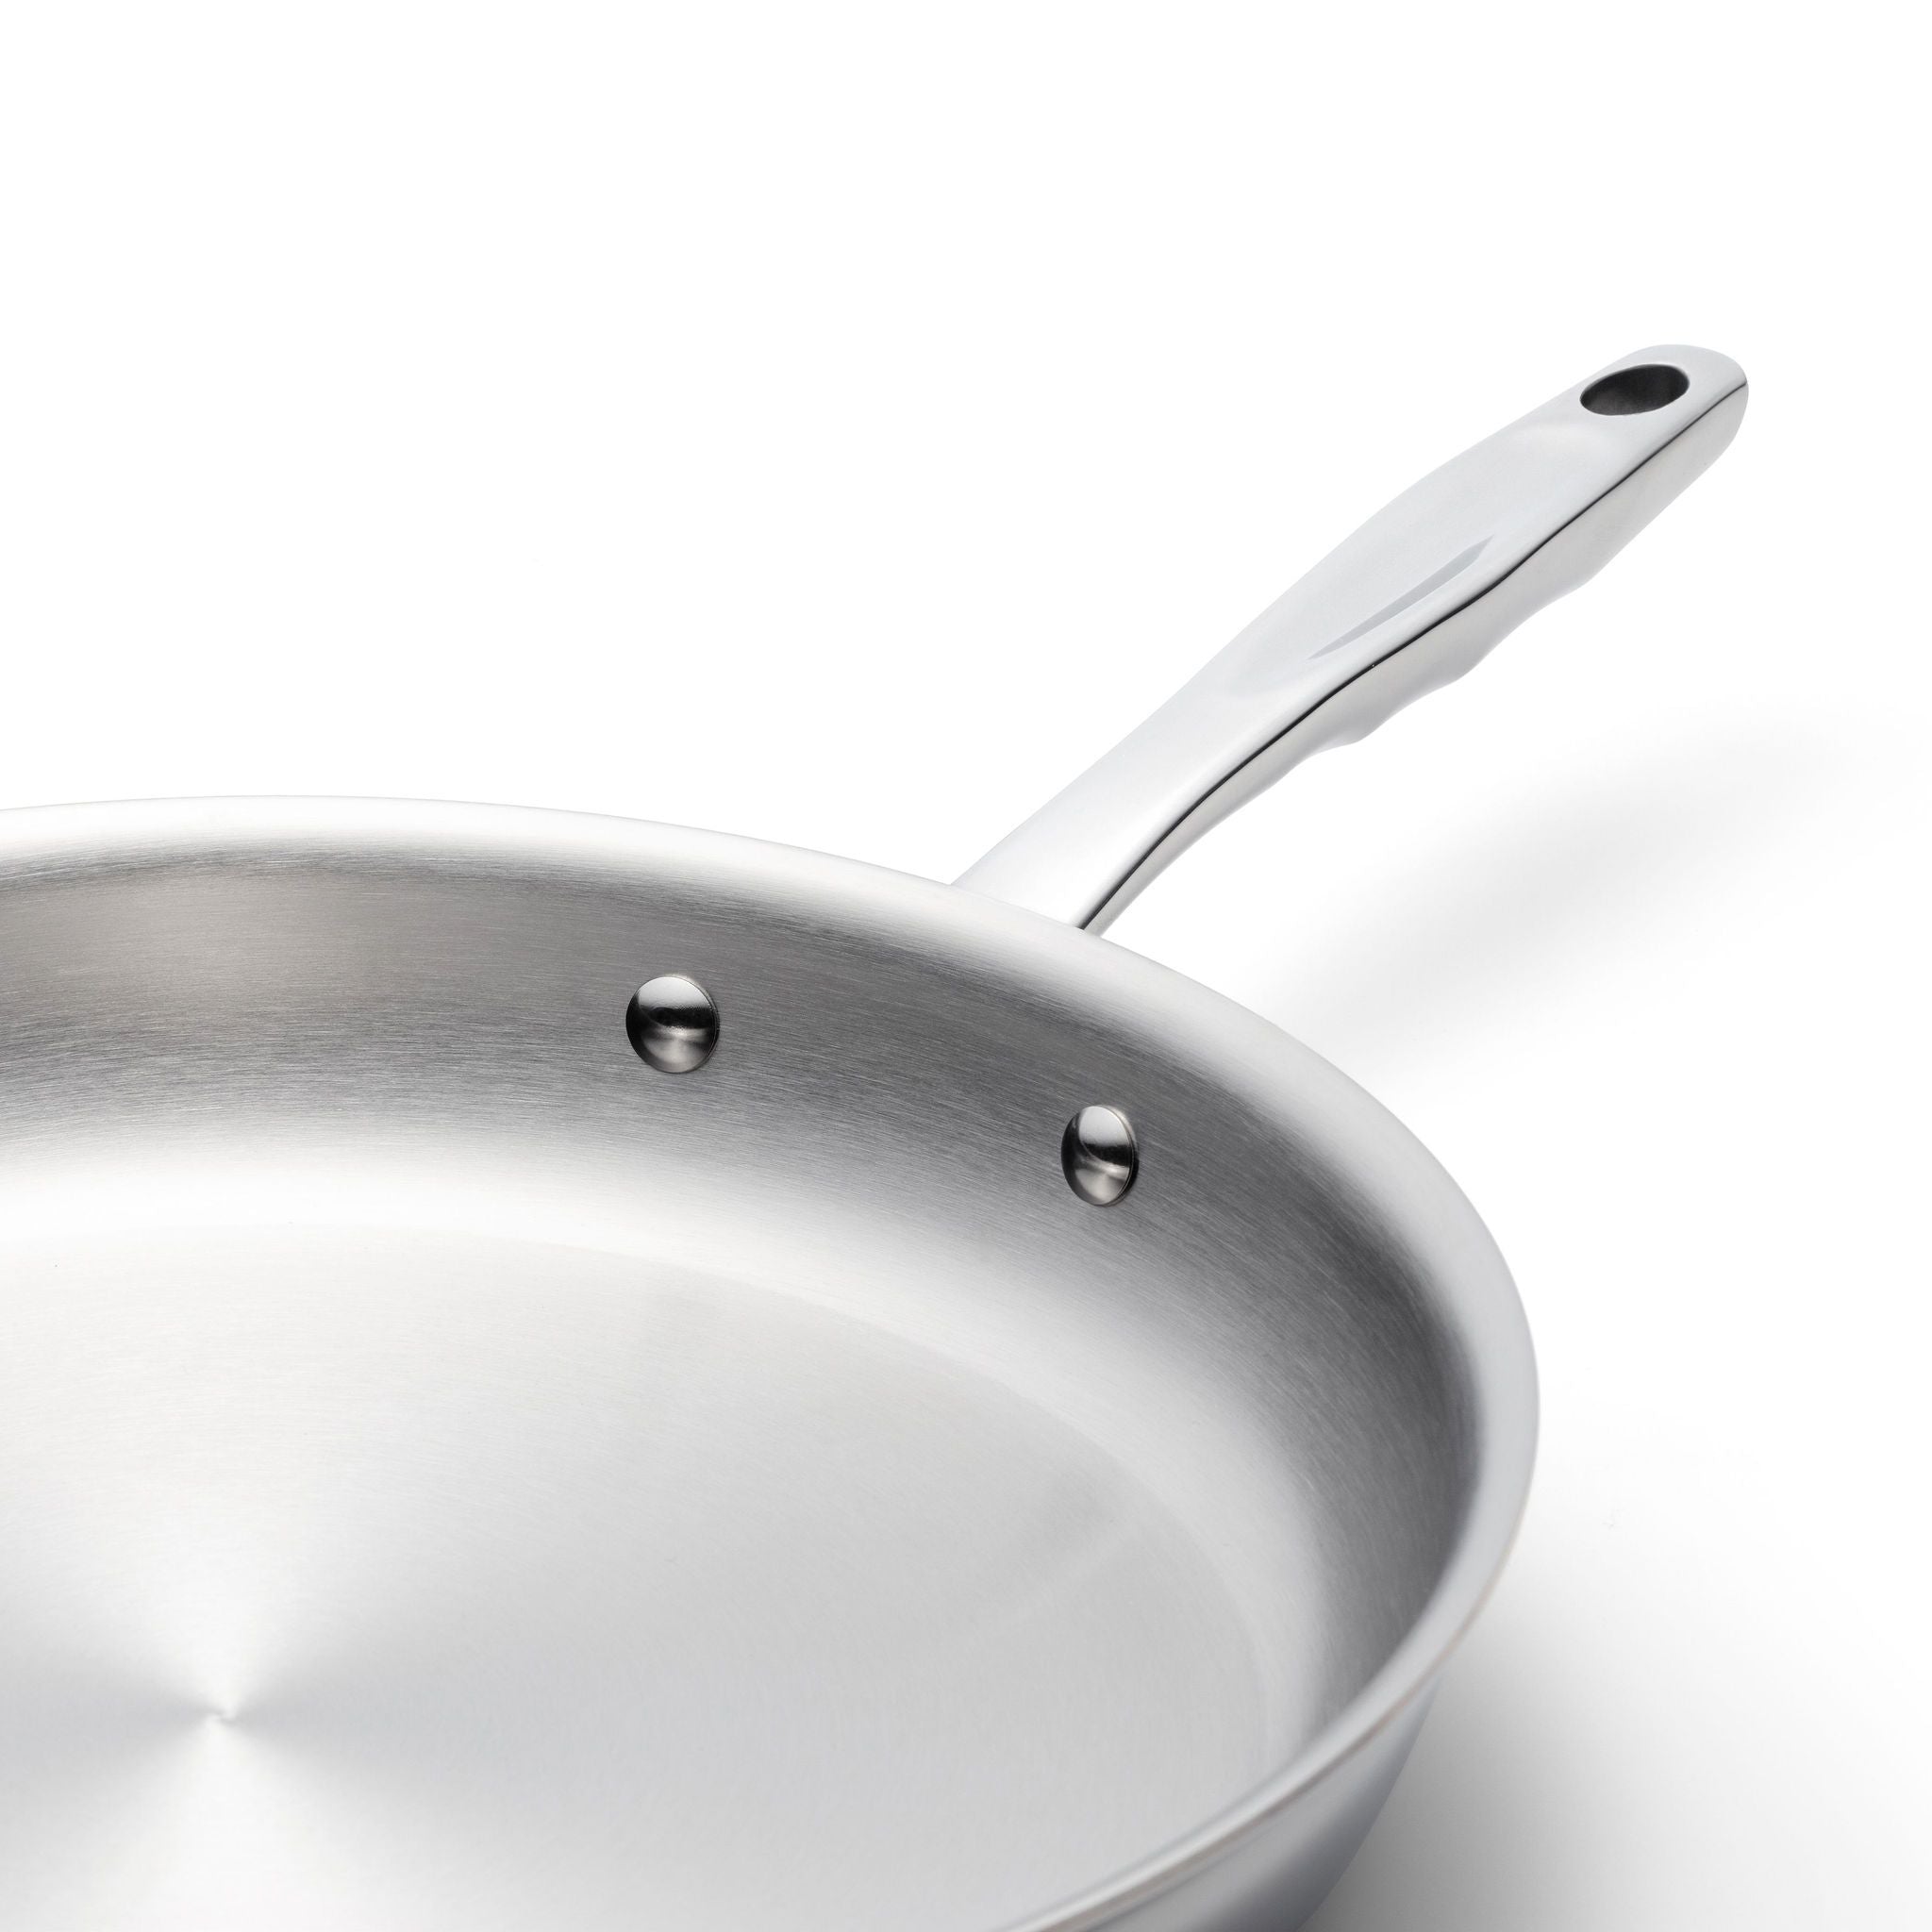 Stainless Steel Cookware by 360 Cookware